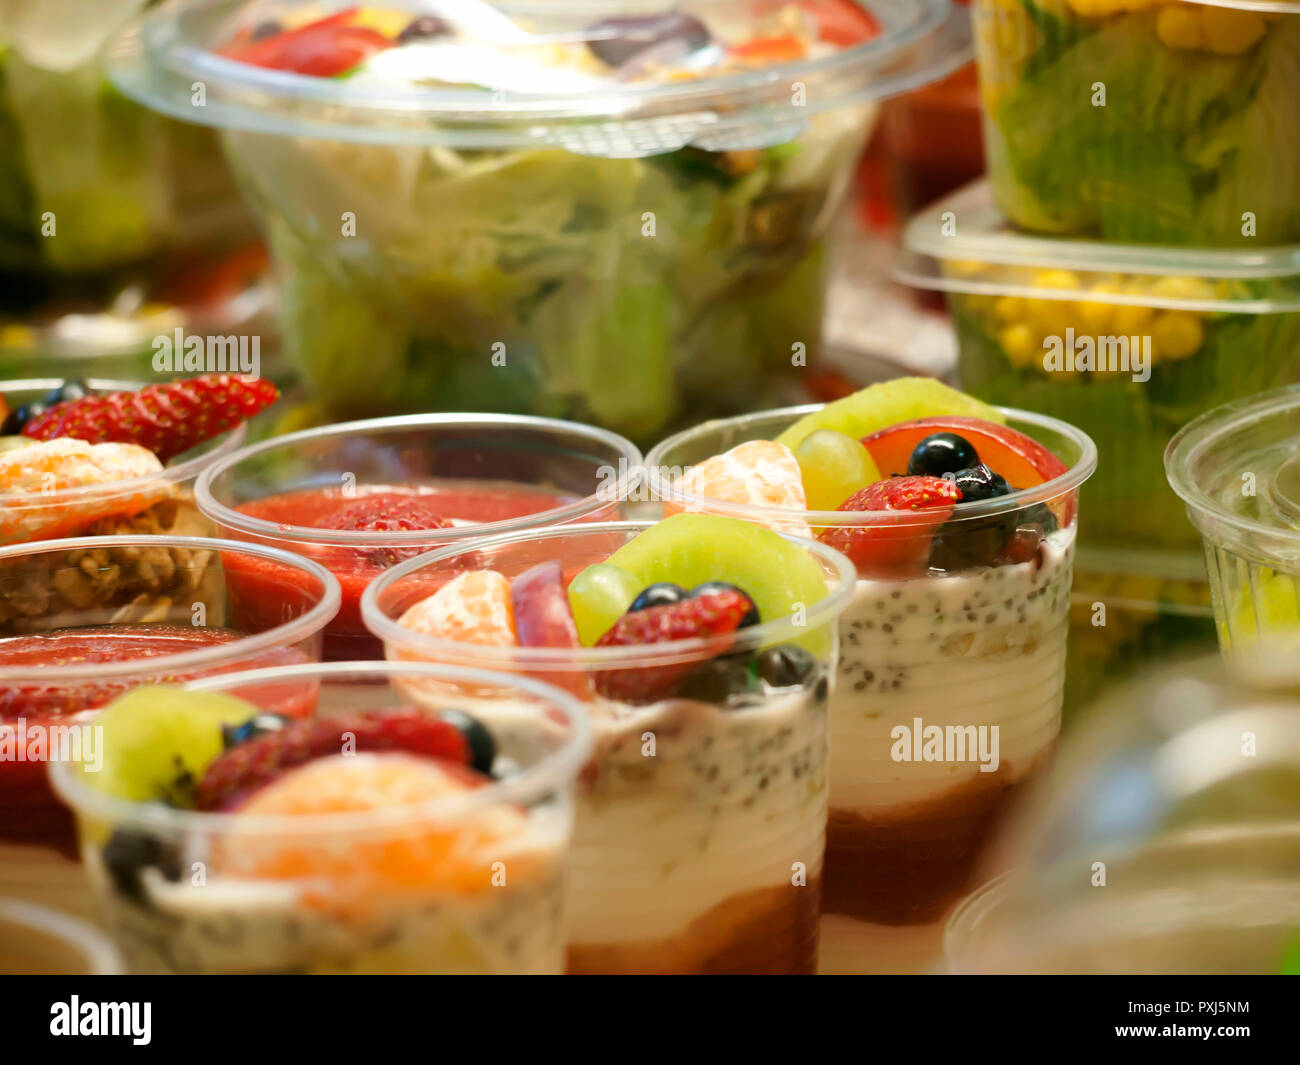 Healthy food on display, ripe fruit and yoghurt, small portions on sale, closeup Stock Photo